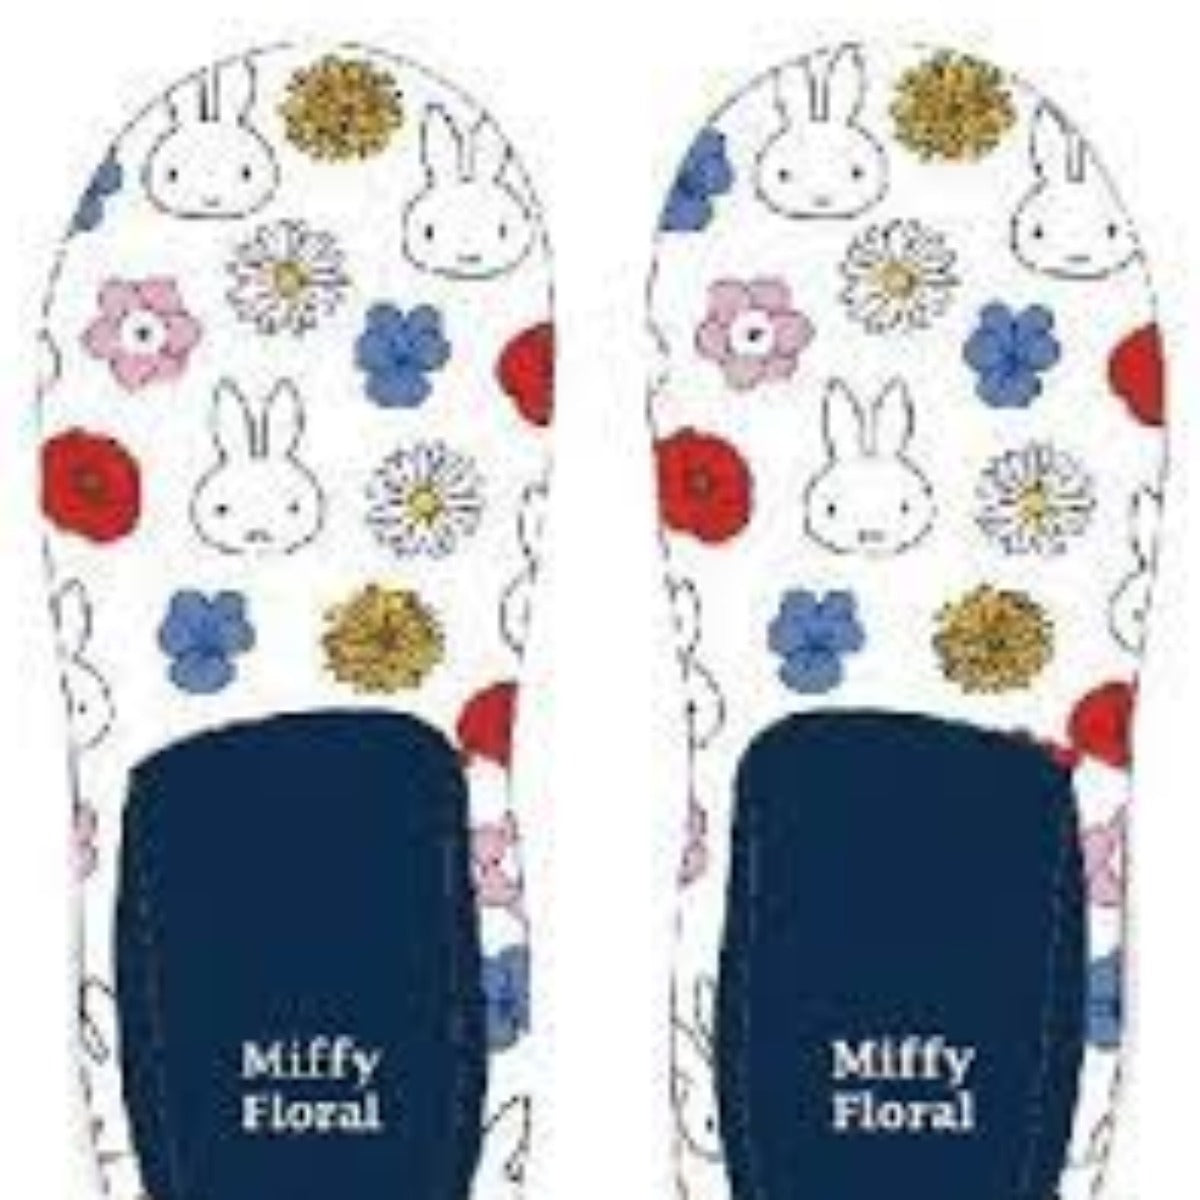 Room Shoes - Miffy Floral Black (Japan Edition)